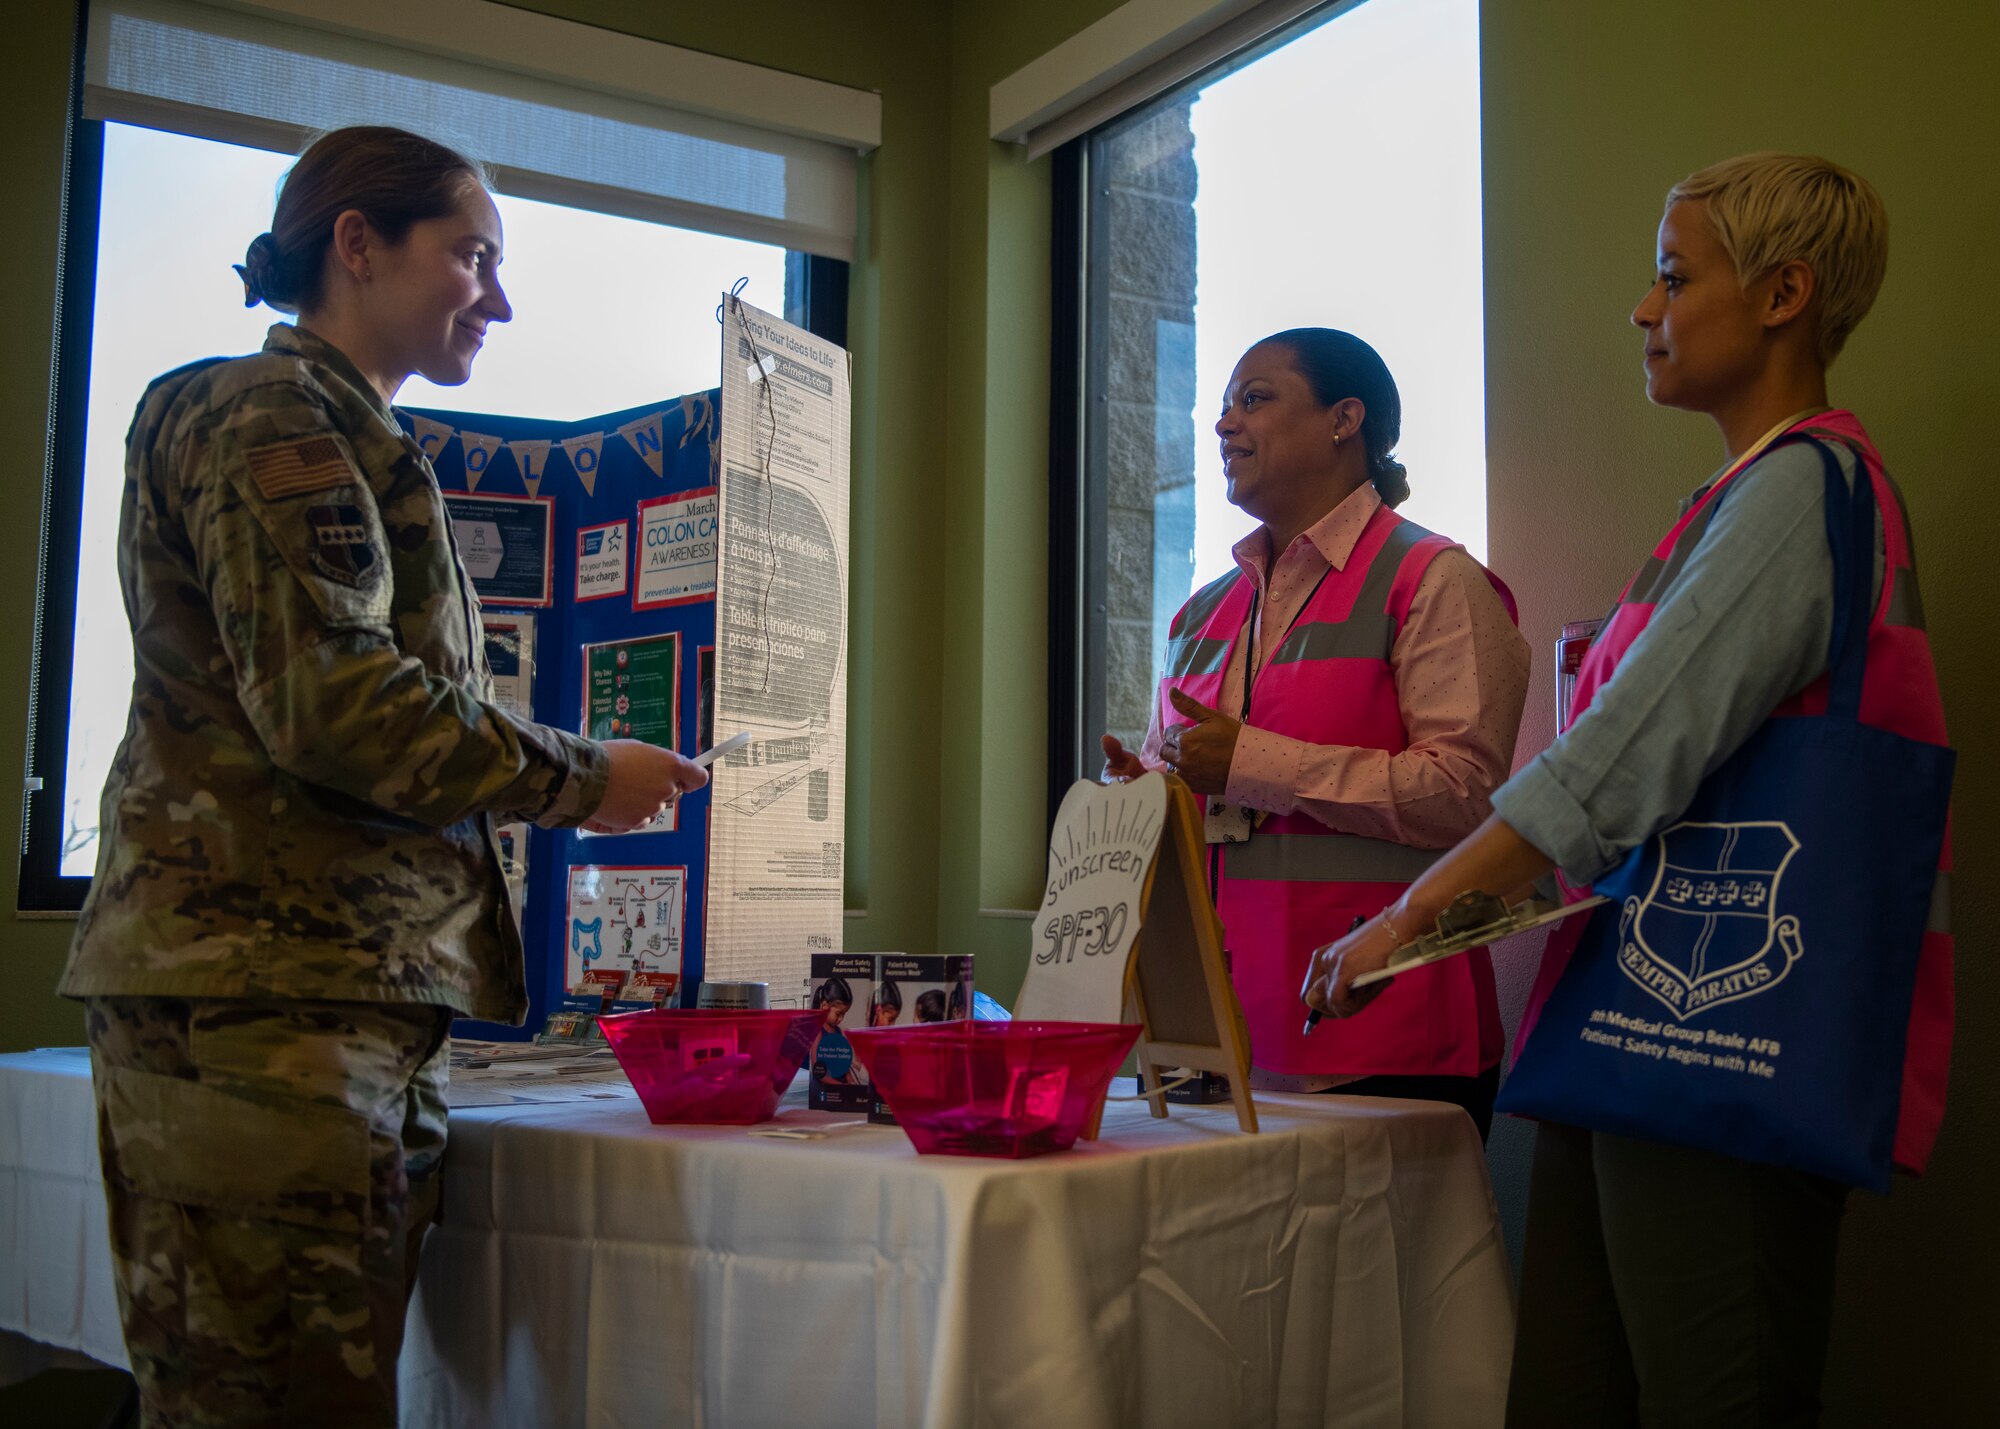 Lynn Bergmann, 9th Medical Group (MDG) Patient Safety Program Coordinator, and Denise Ross, 9th MDG Patient Advocate speak to an Airman about patient safety on Beale Air Force Base, California.